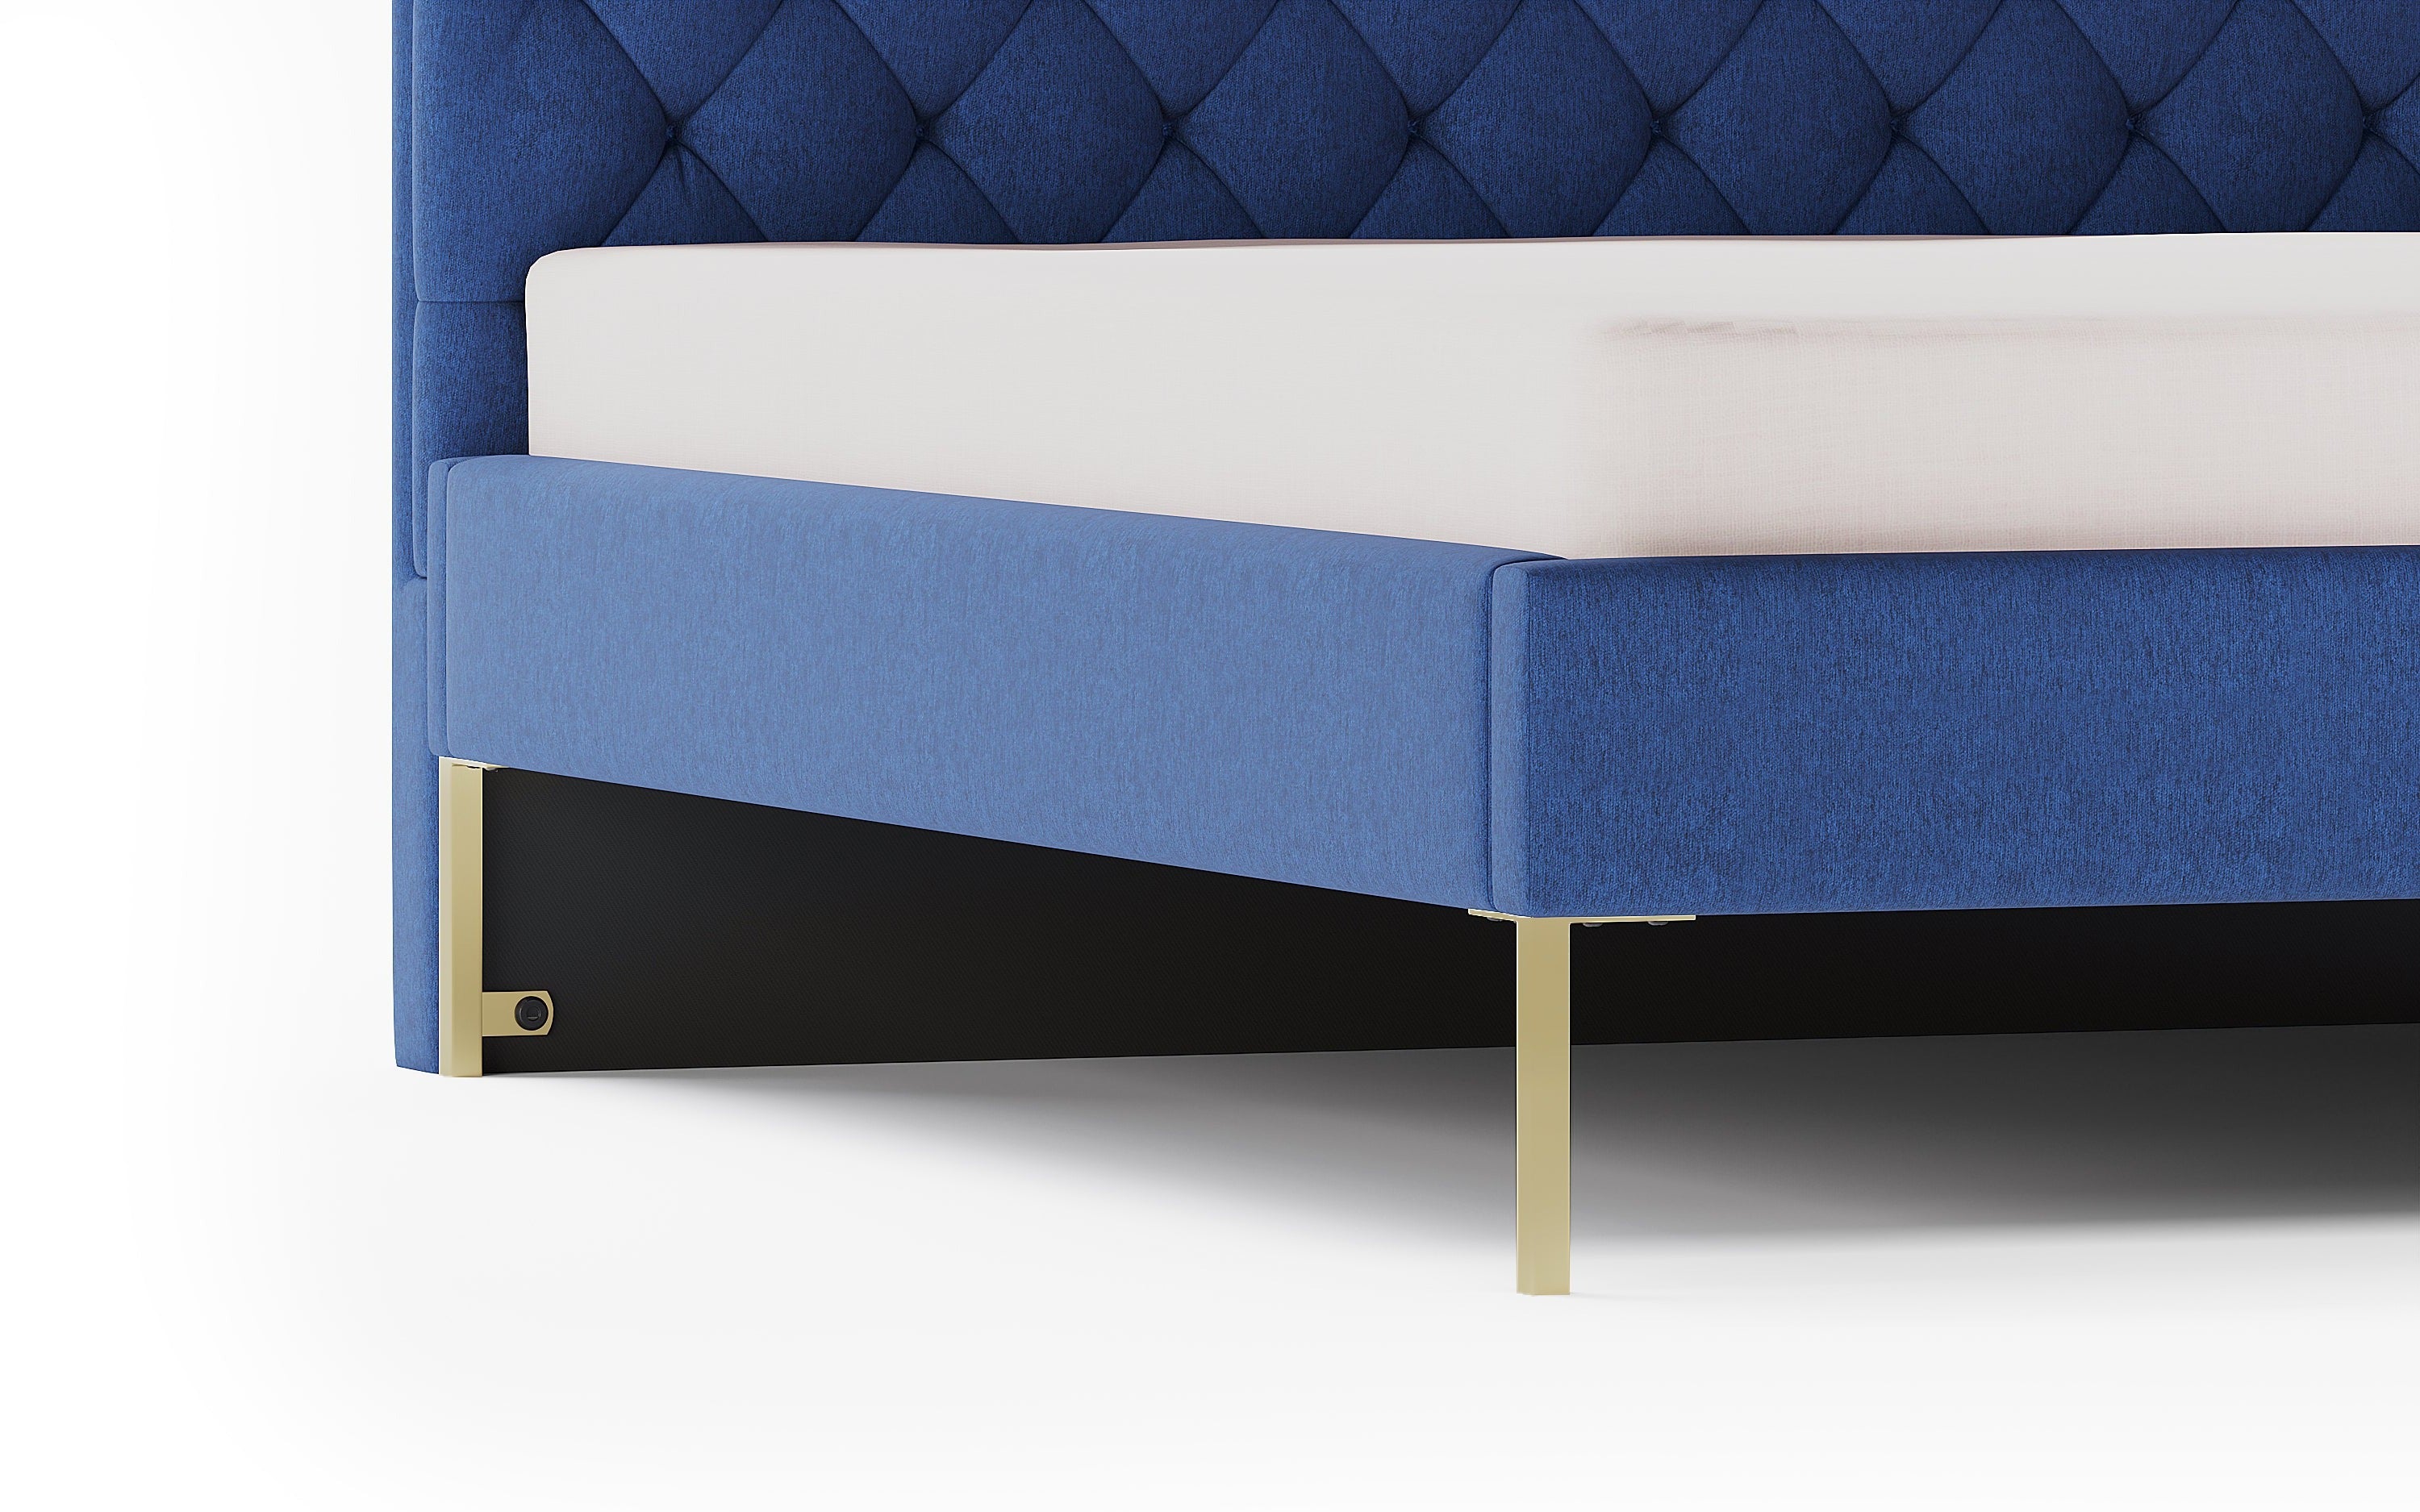 June Upholstered King Non Storage Bed